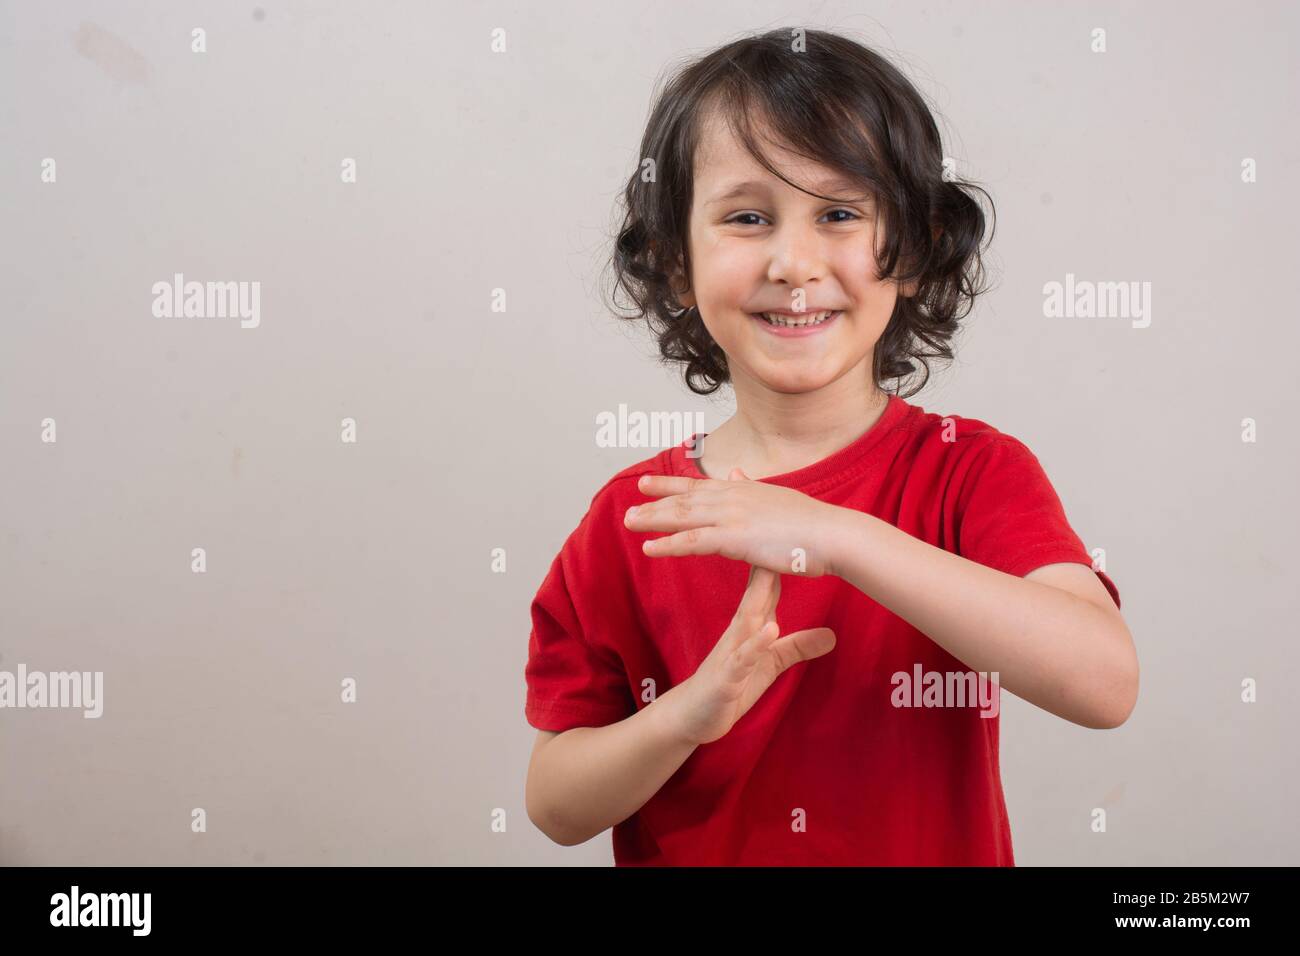 Smiling little  boy making a pause or break time hand gesture Stock Photo